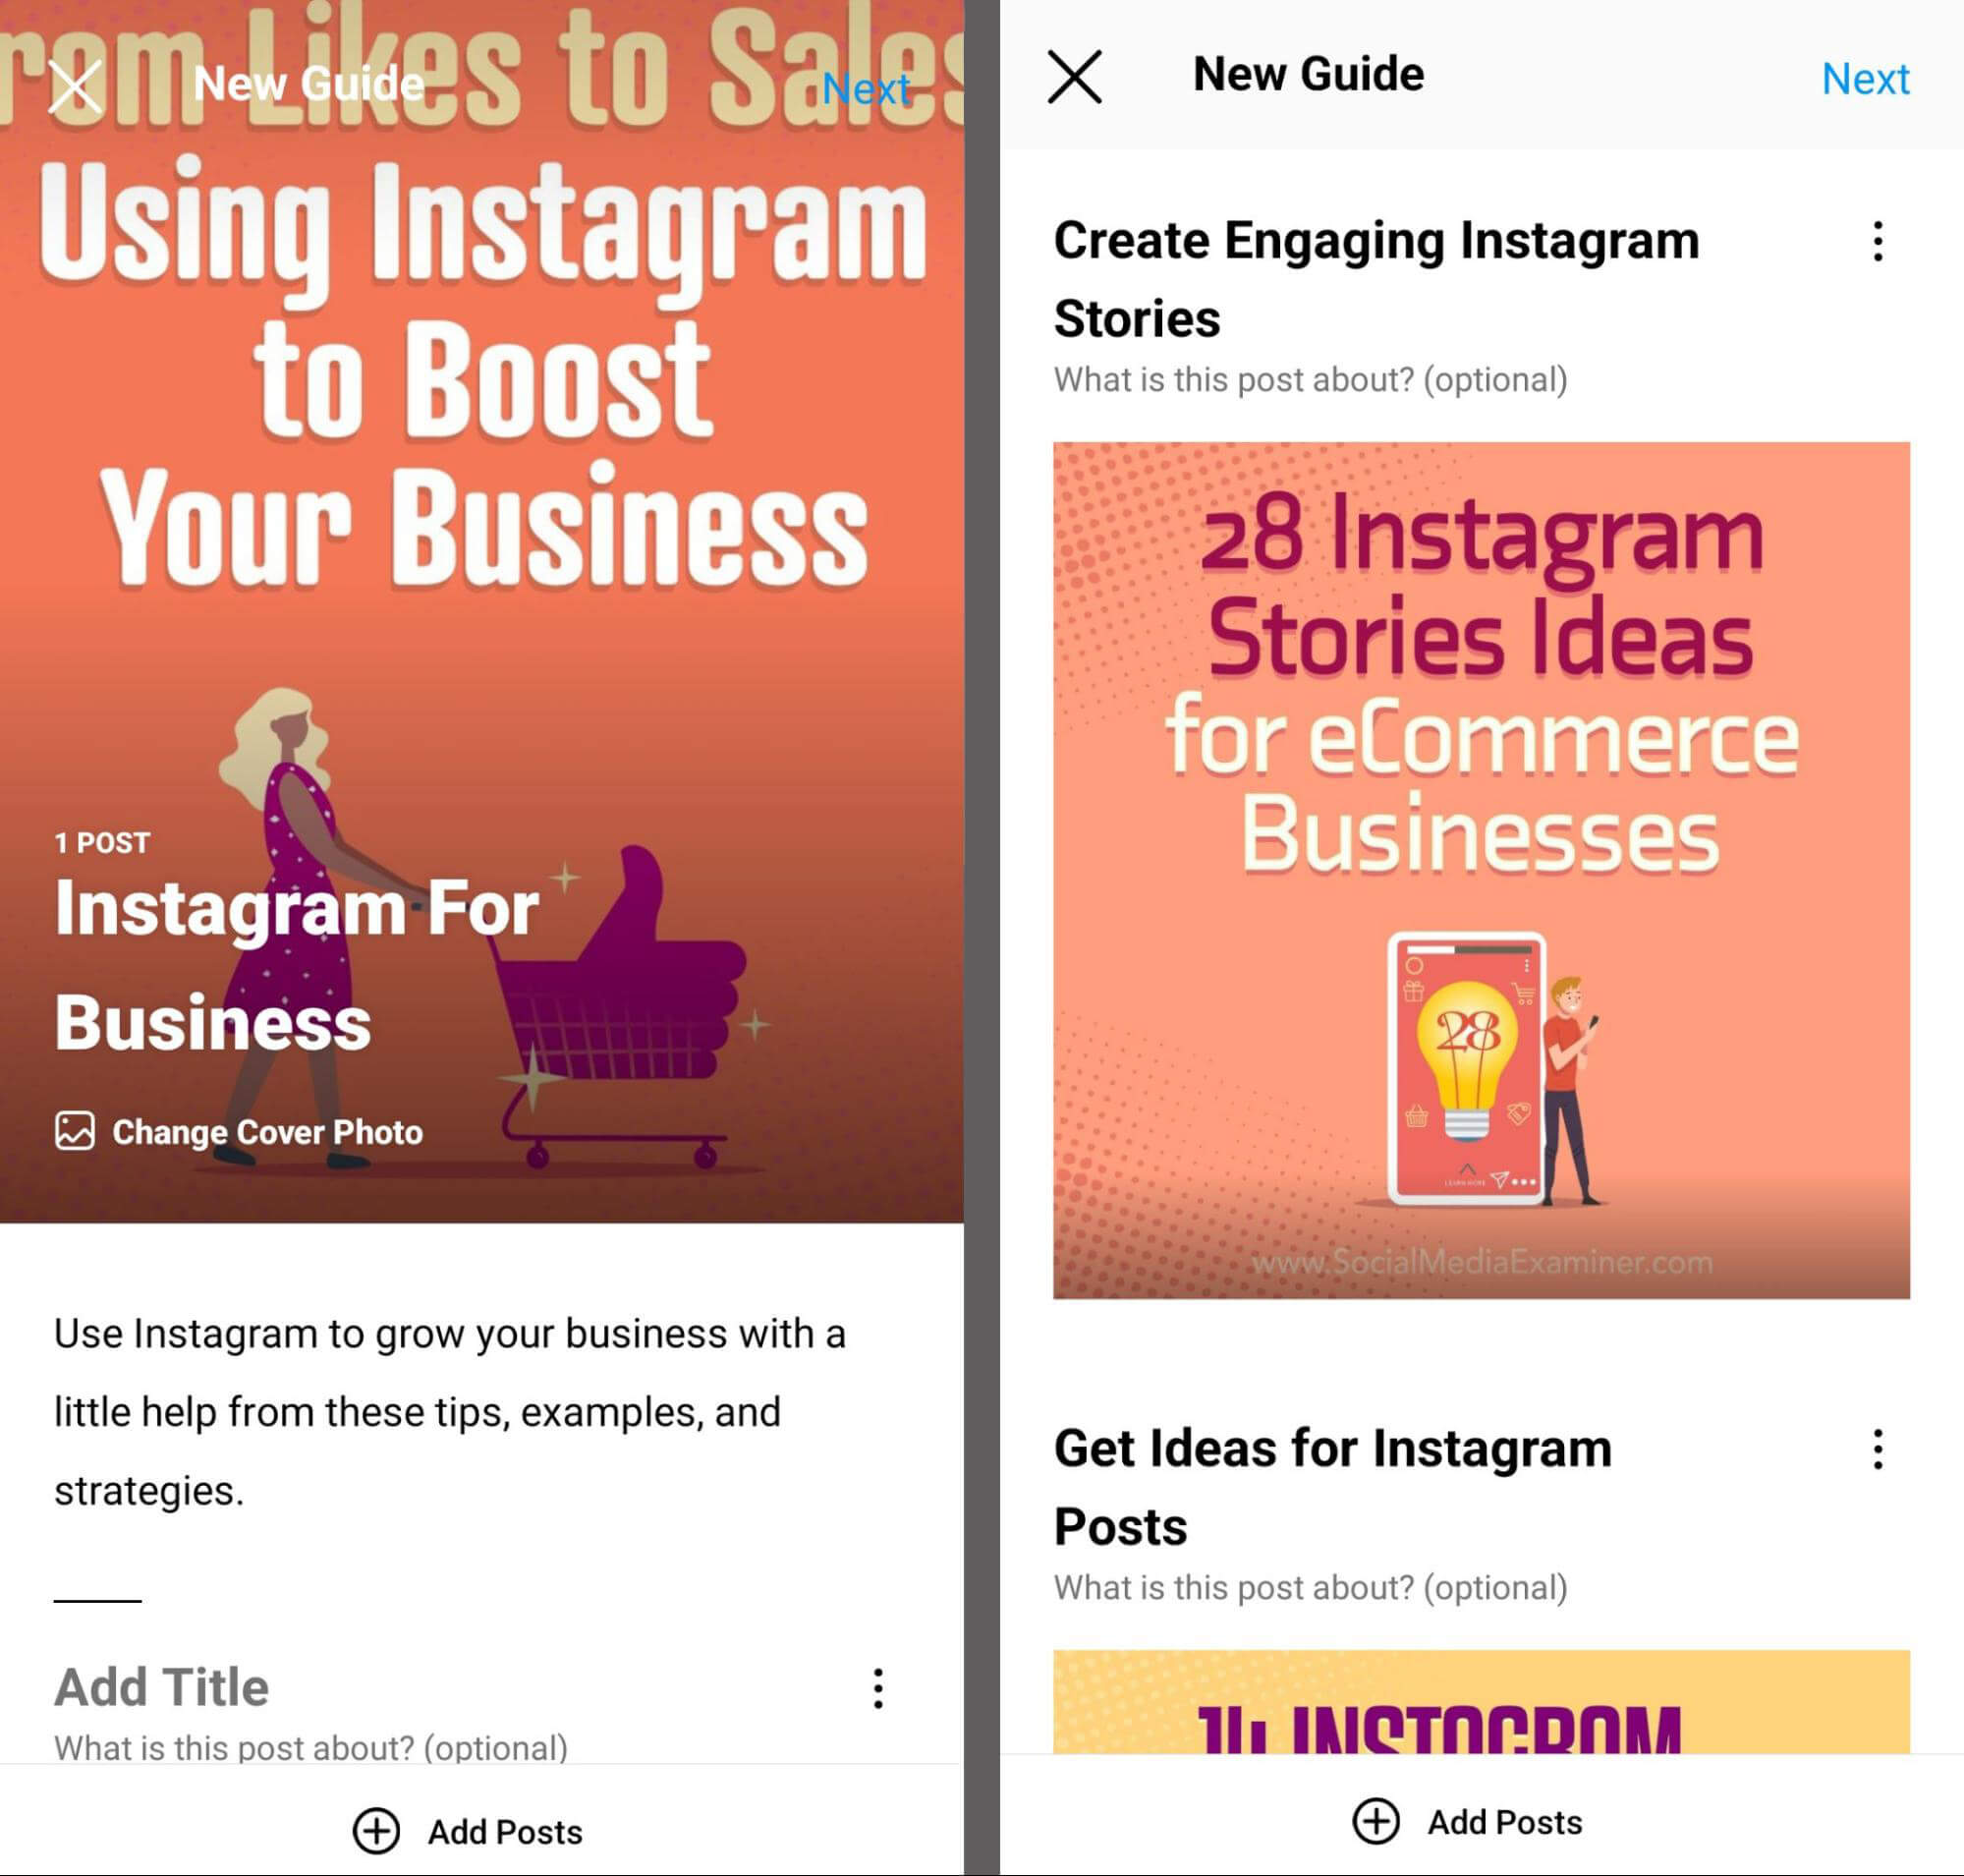 optimize-your-instagram-guide-6-6